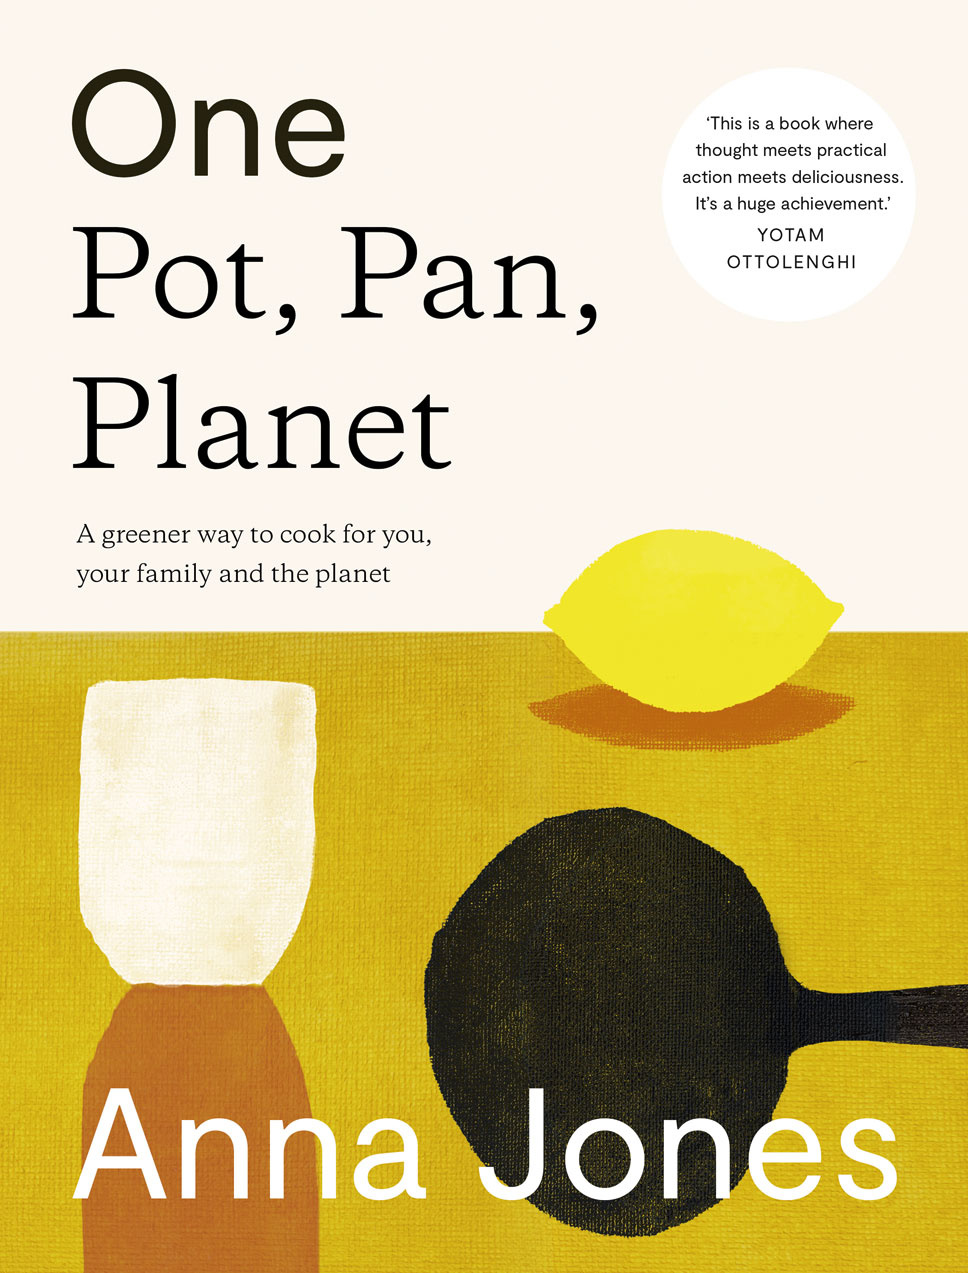 Book cover of One Pot, Pan, Planet by Anna Jones